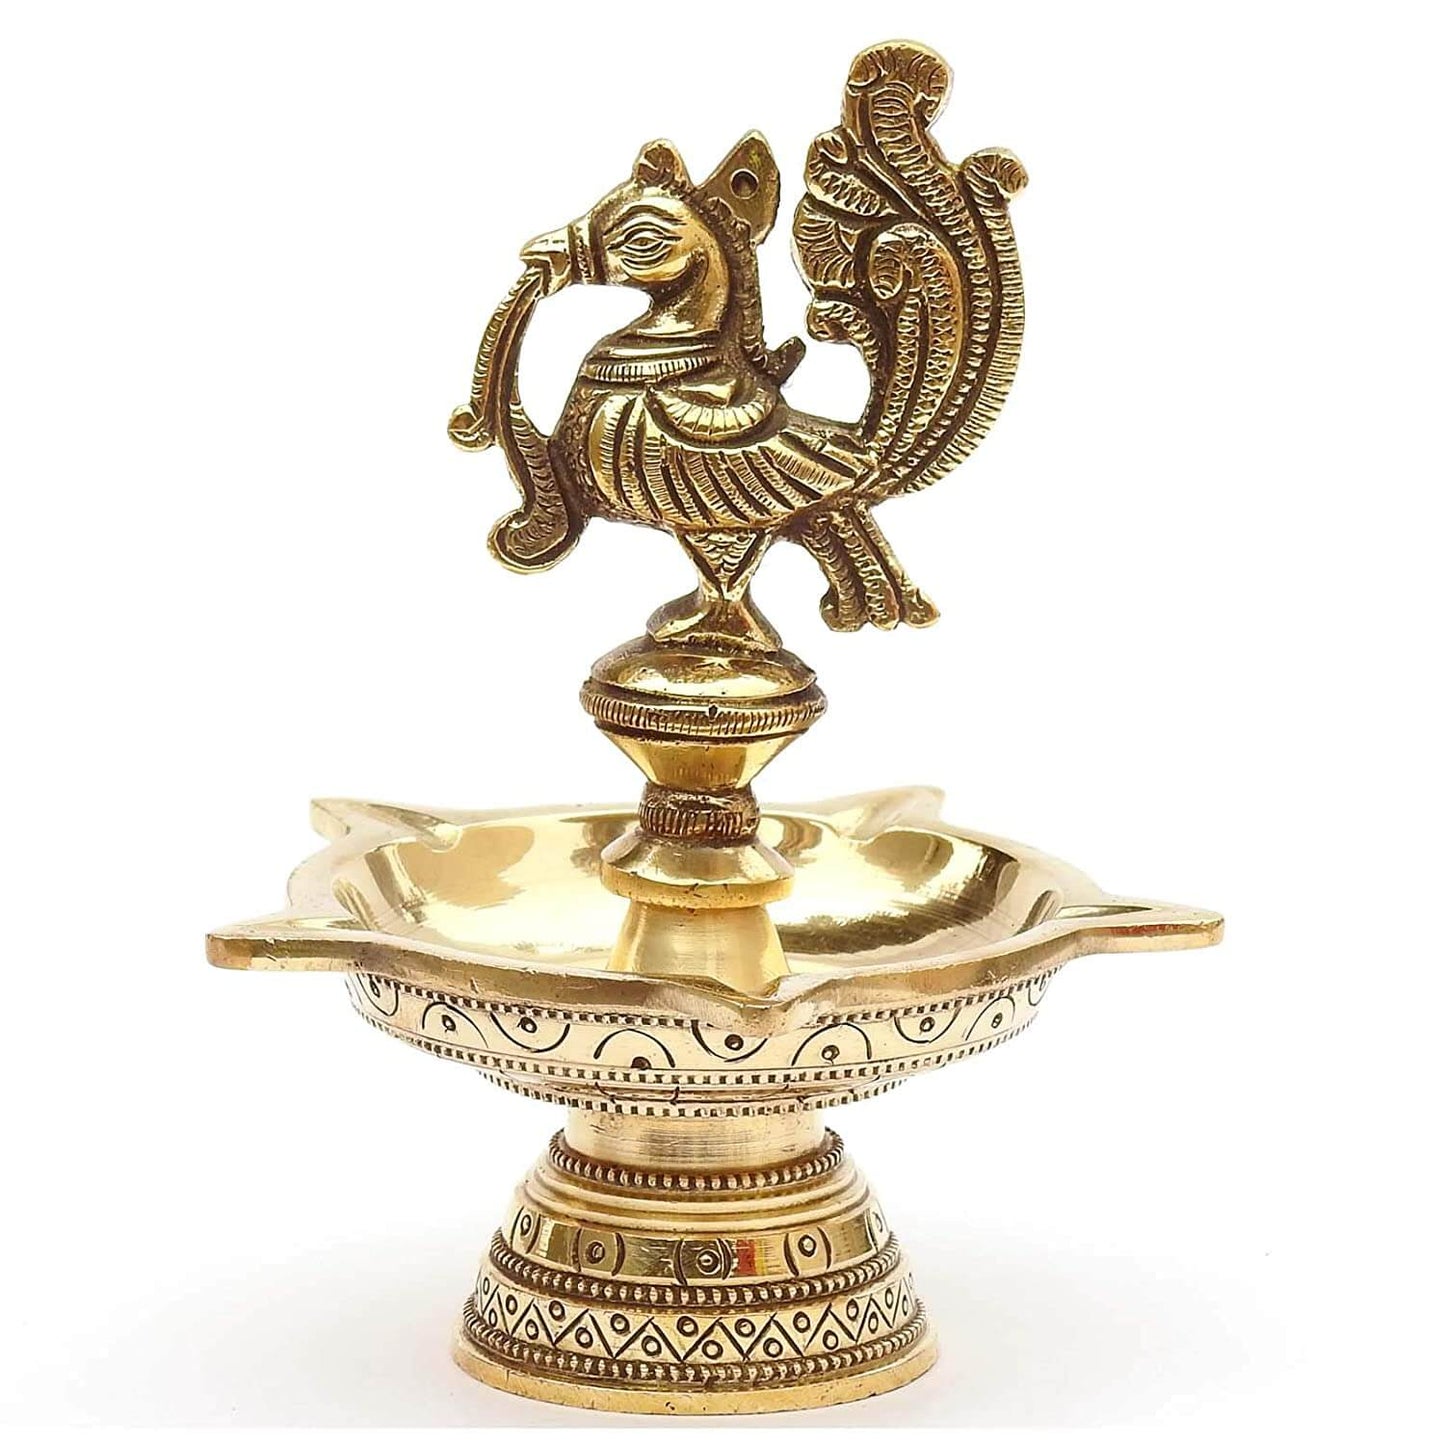 5 Faces Decorative Brass Peacock Table Diya for Decoration and Diwali Purpose Mangal Fashions | Indian Home Decor and Craft